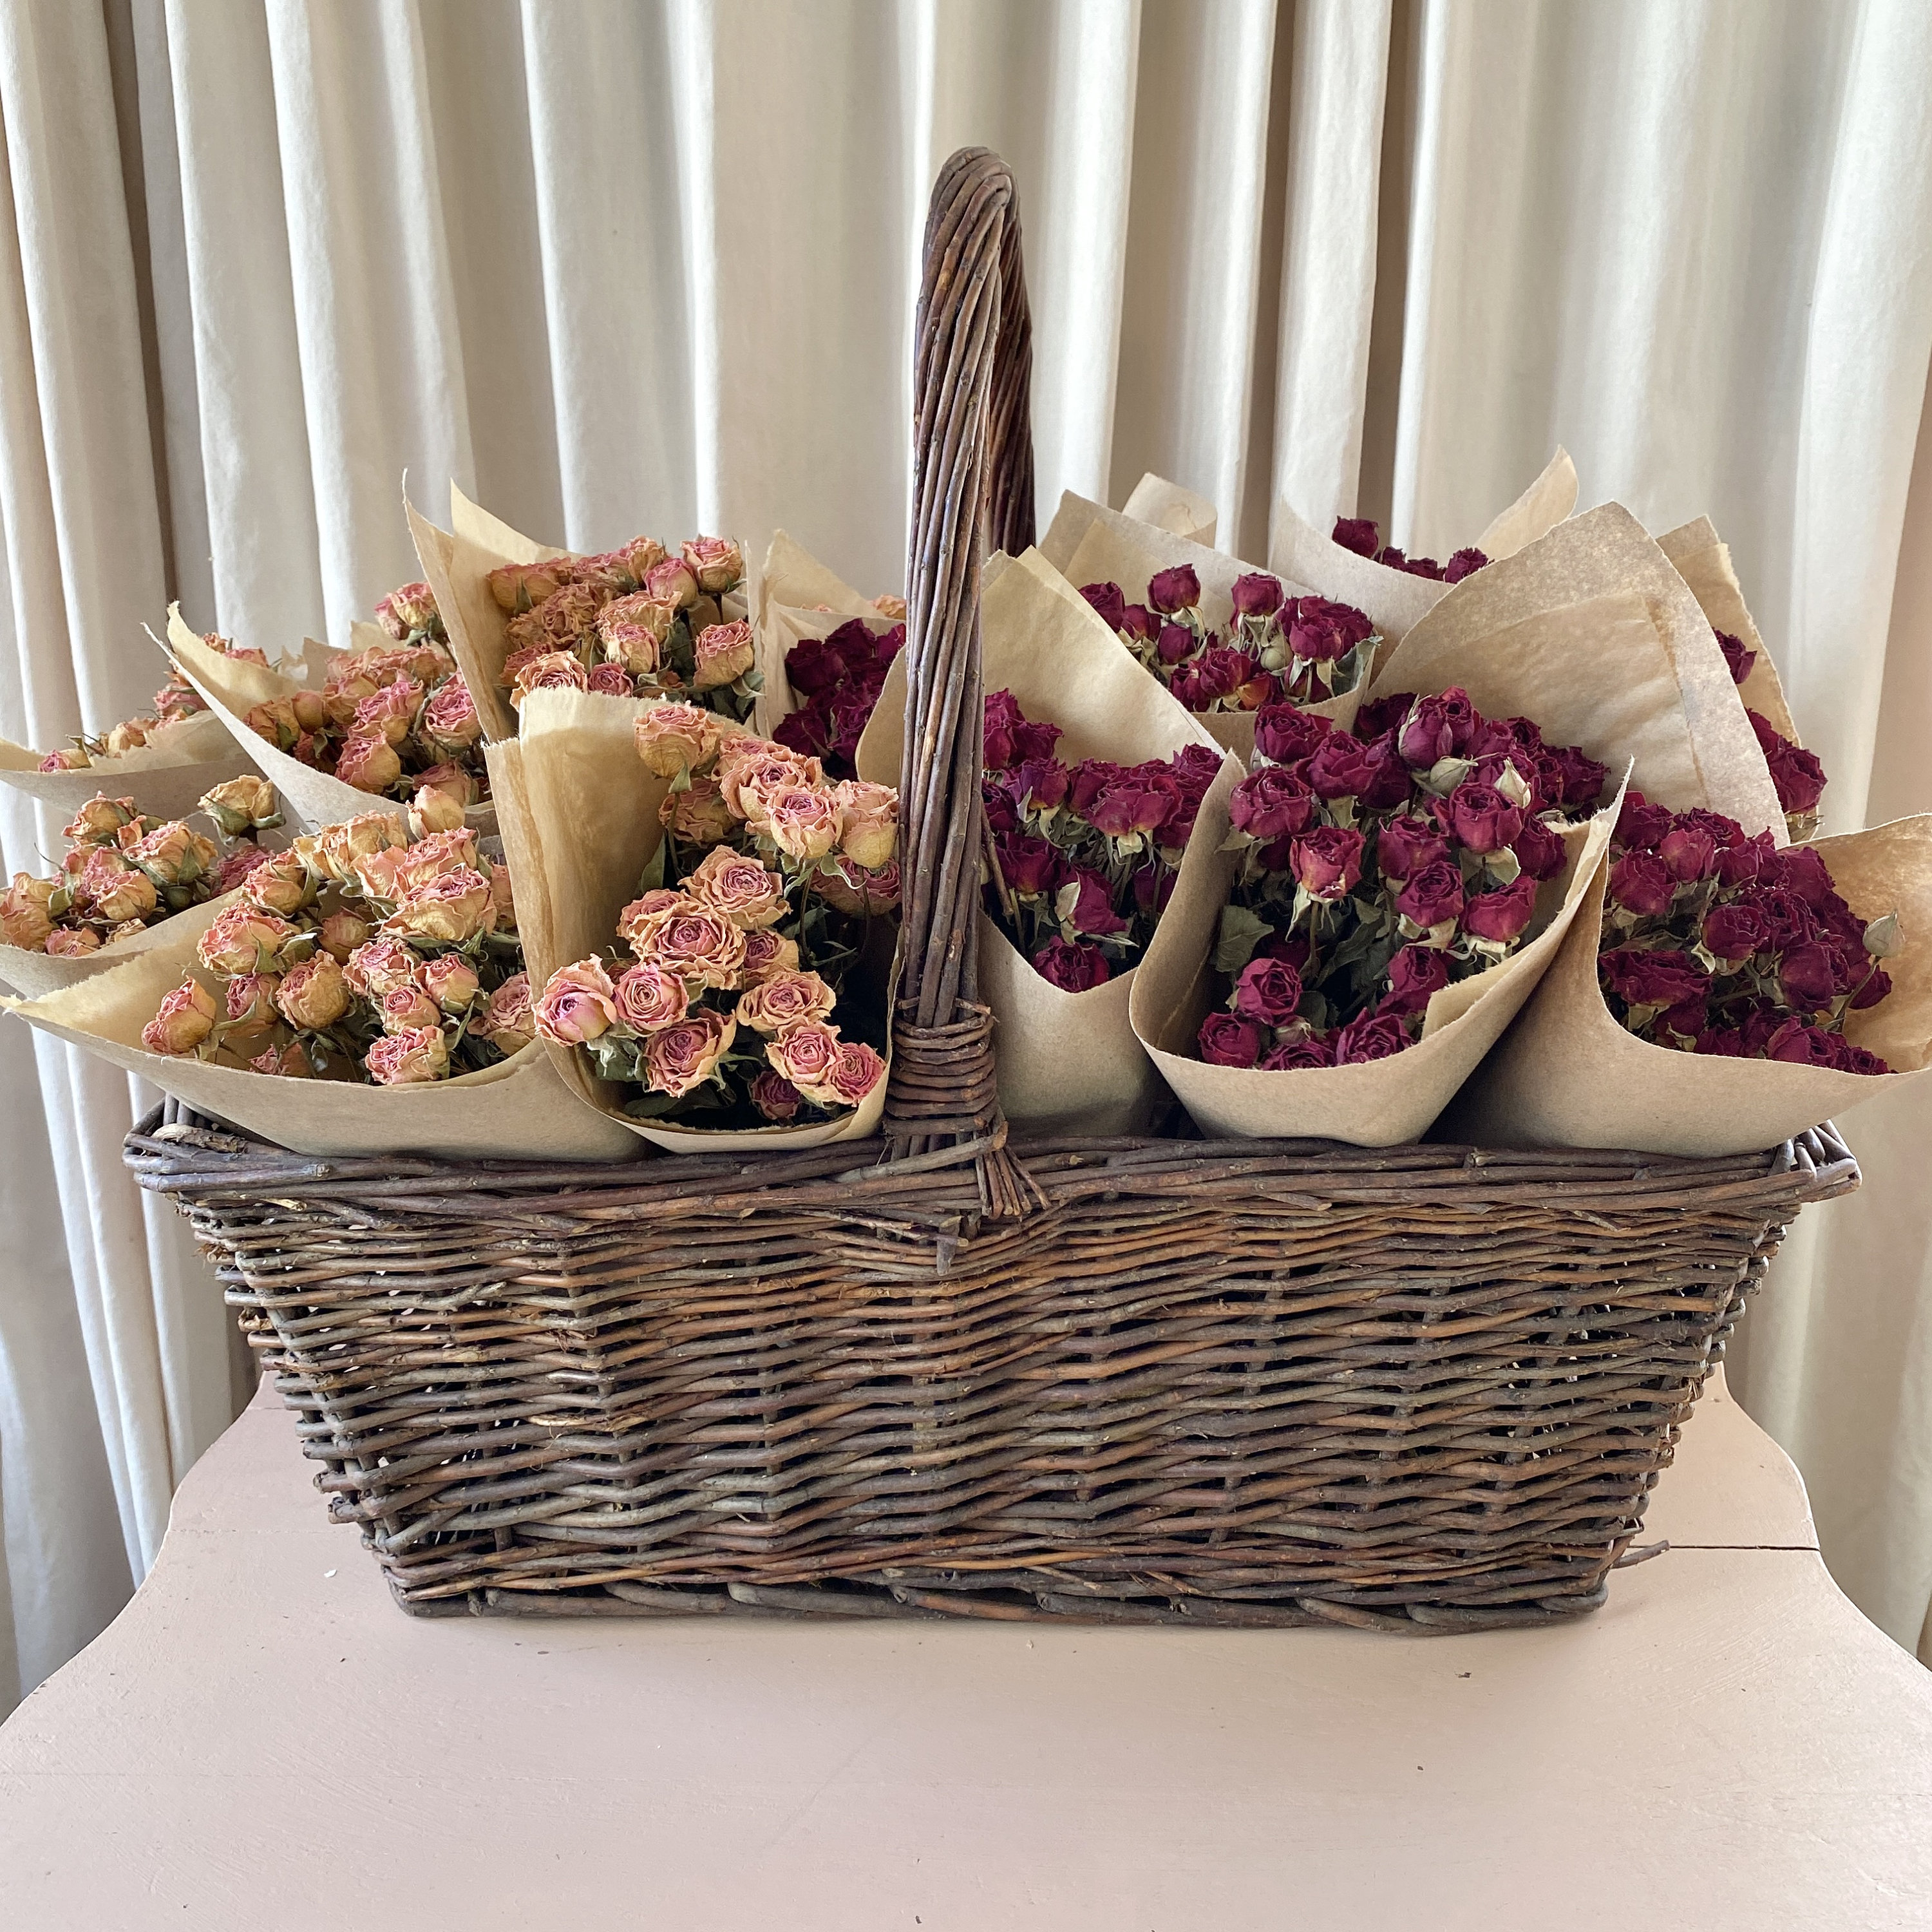  Dried Roses With Stems